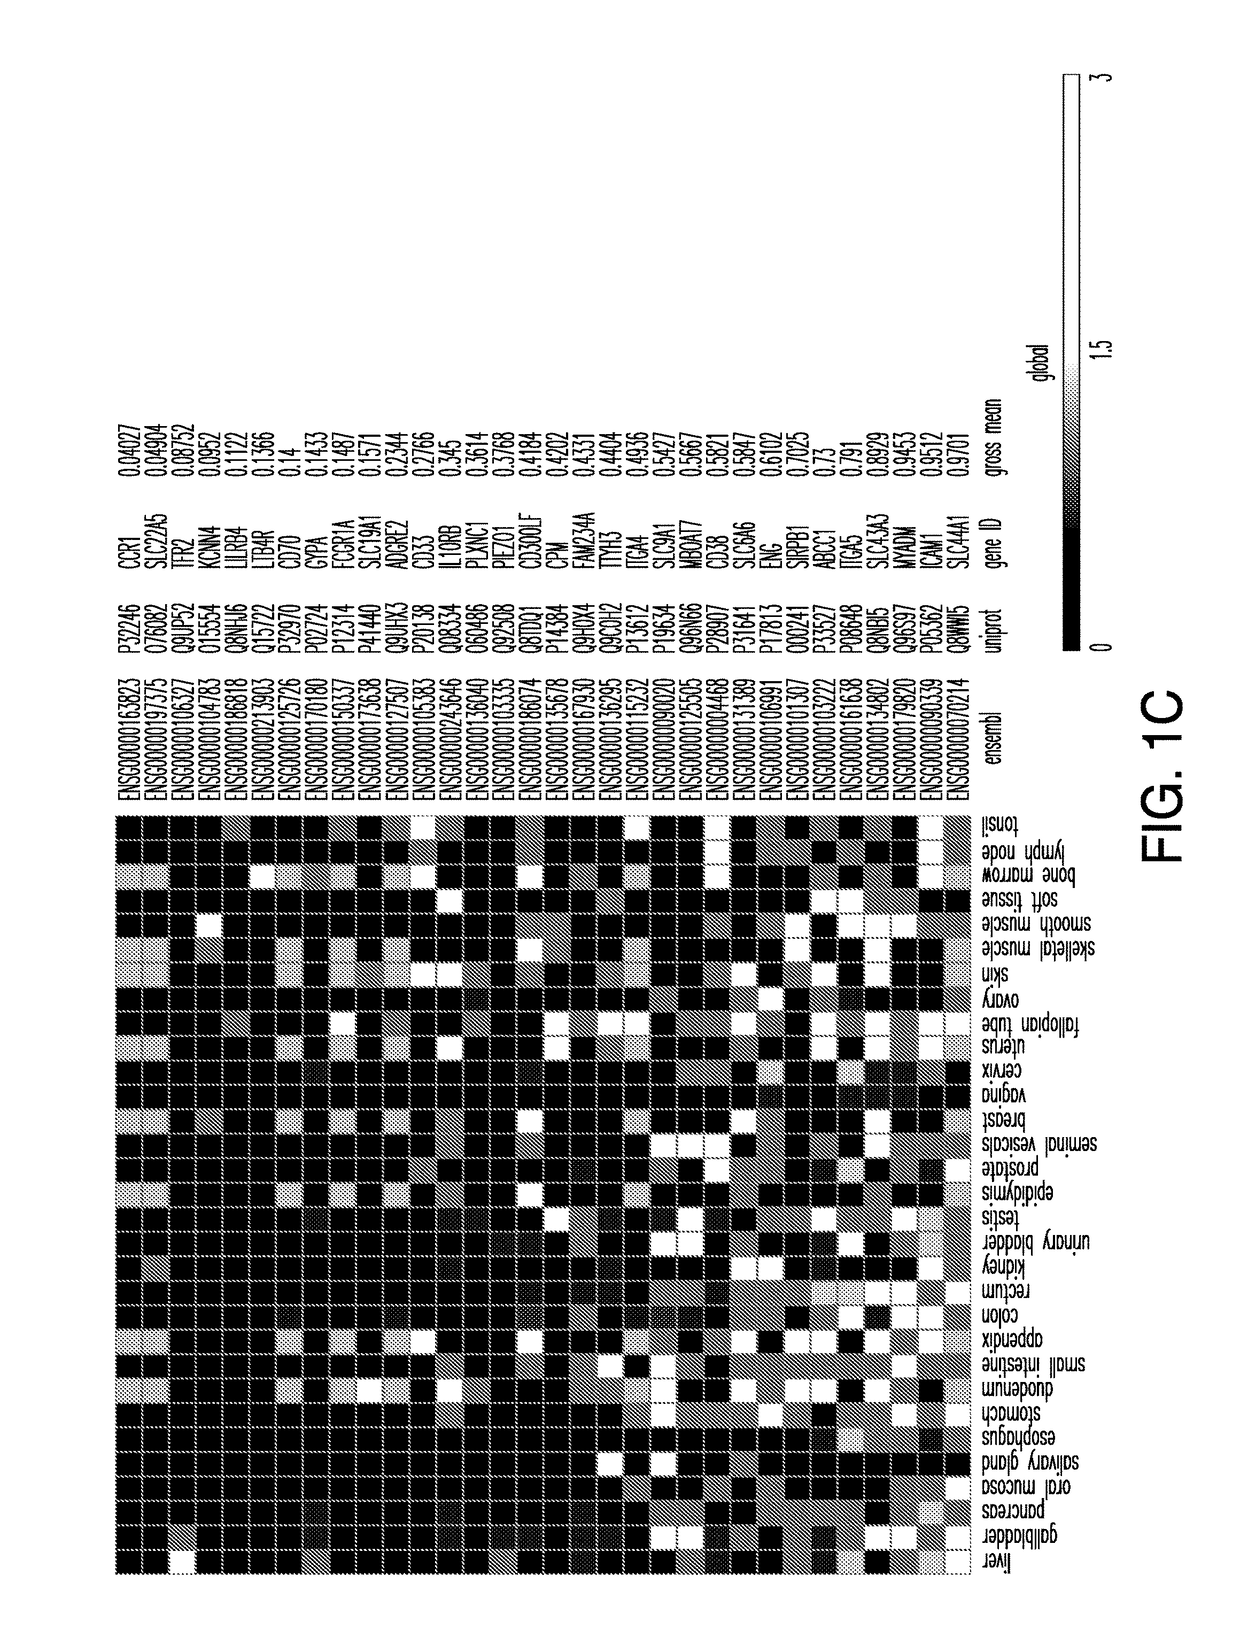 Cancer antigen targets and uses thereof